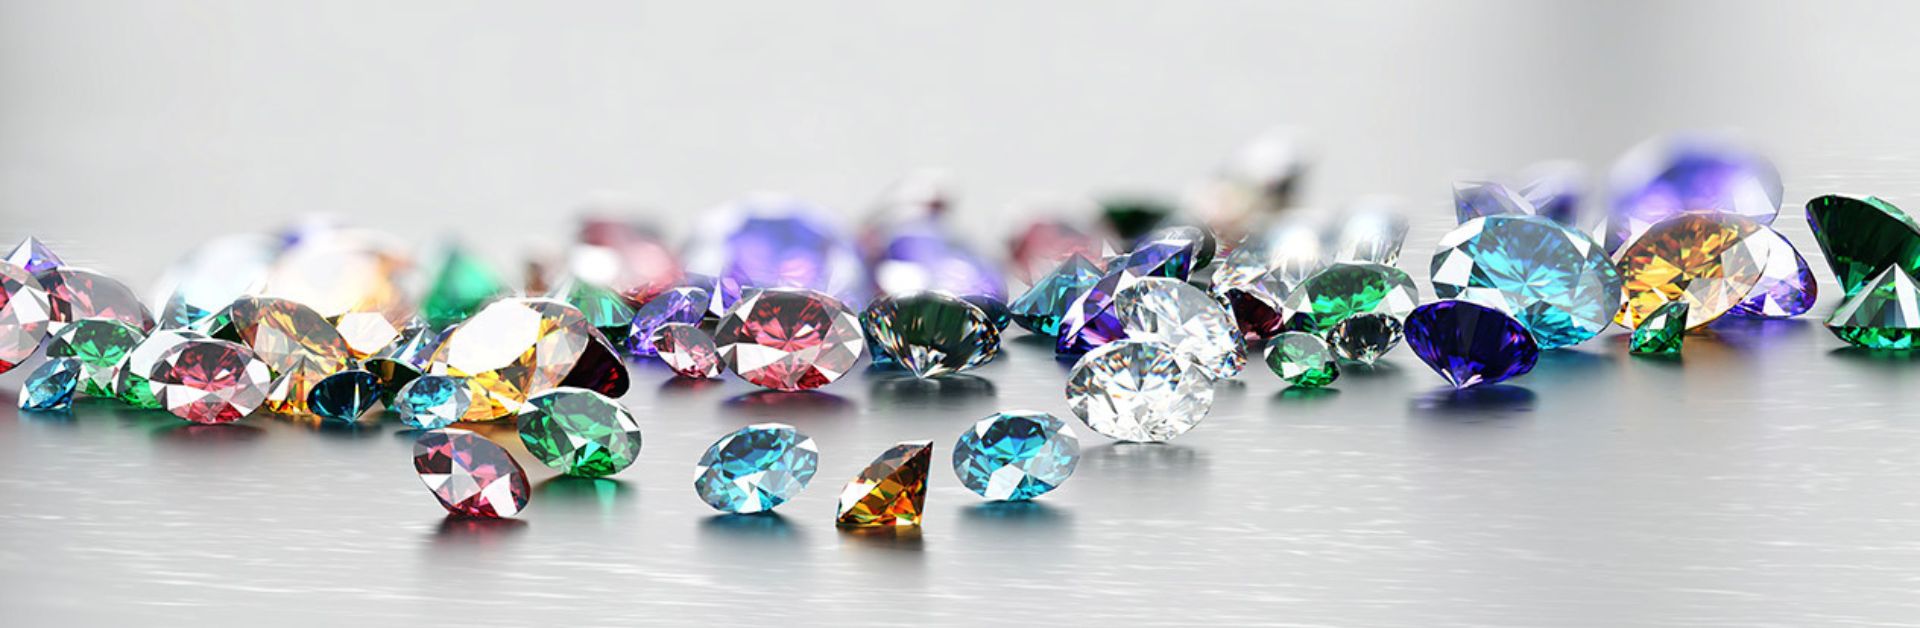 Meanings & Uses Of Popular Colored Gemstones